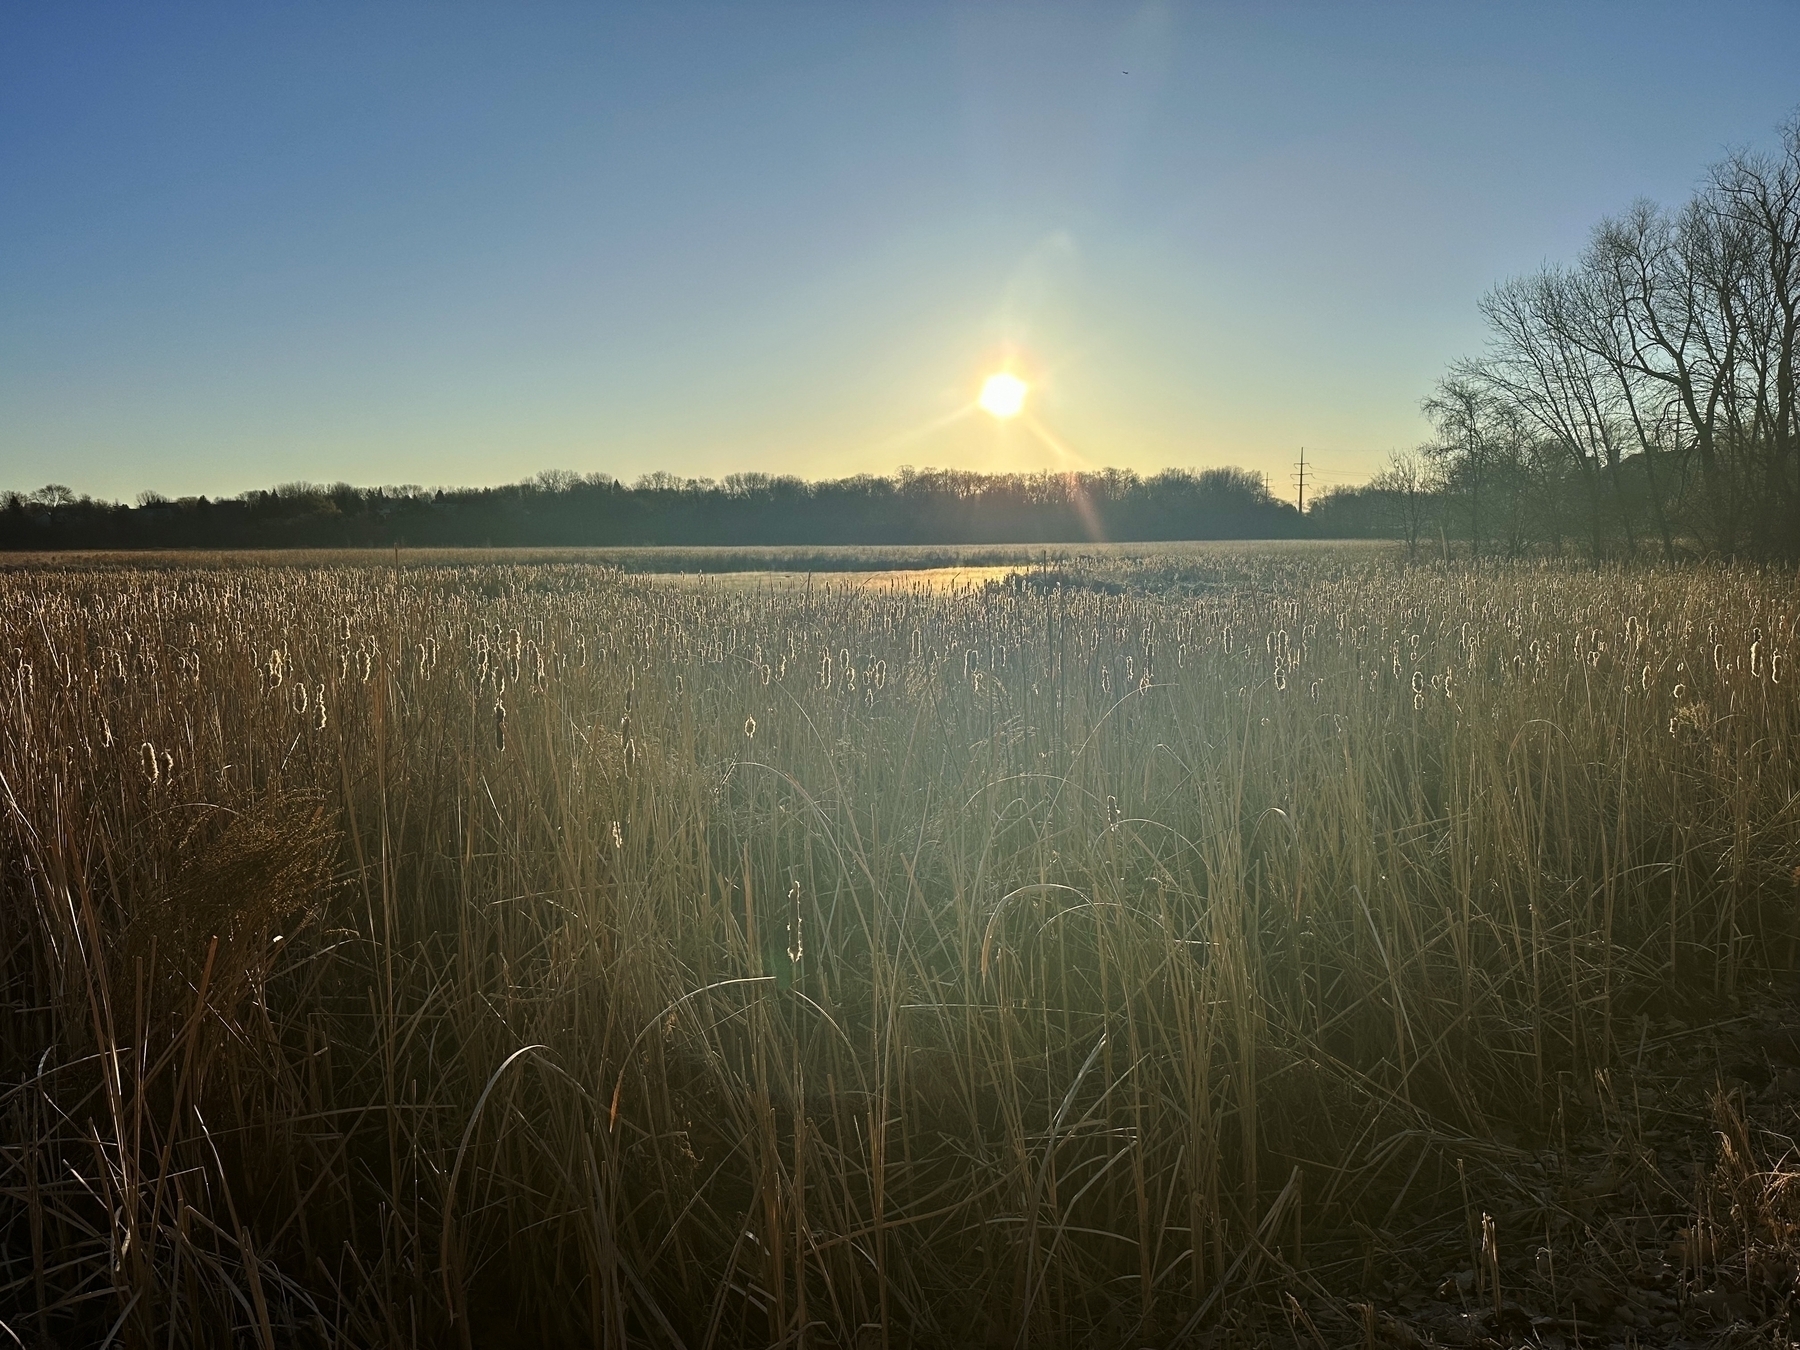 A golden sunrise illuminates a marsh of tall, dry reeds against a backdrop of trees and clear sky.